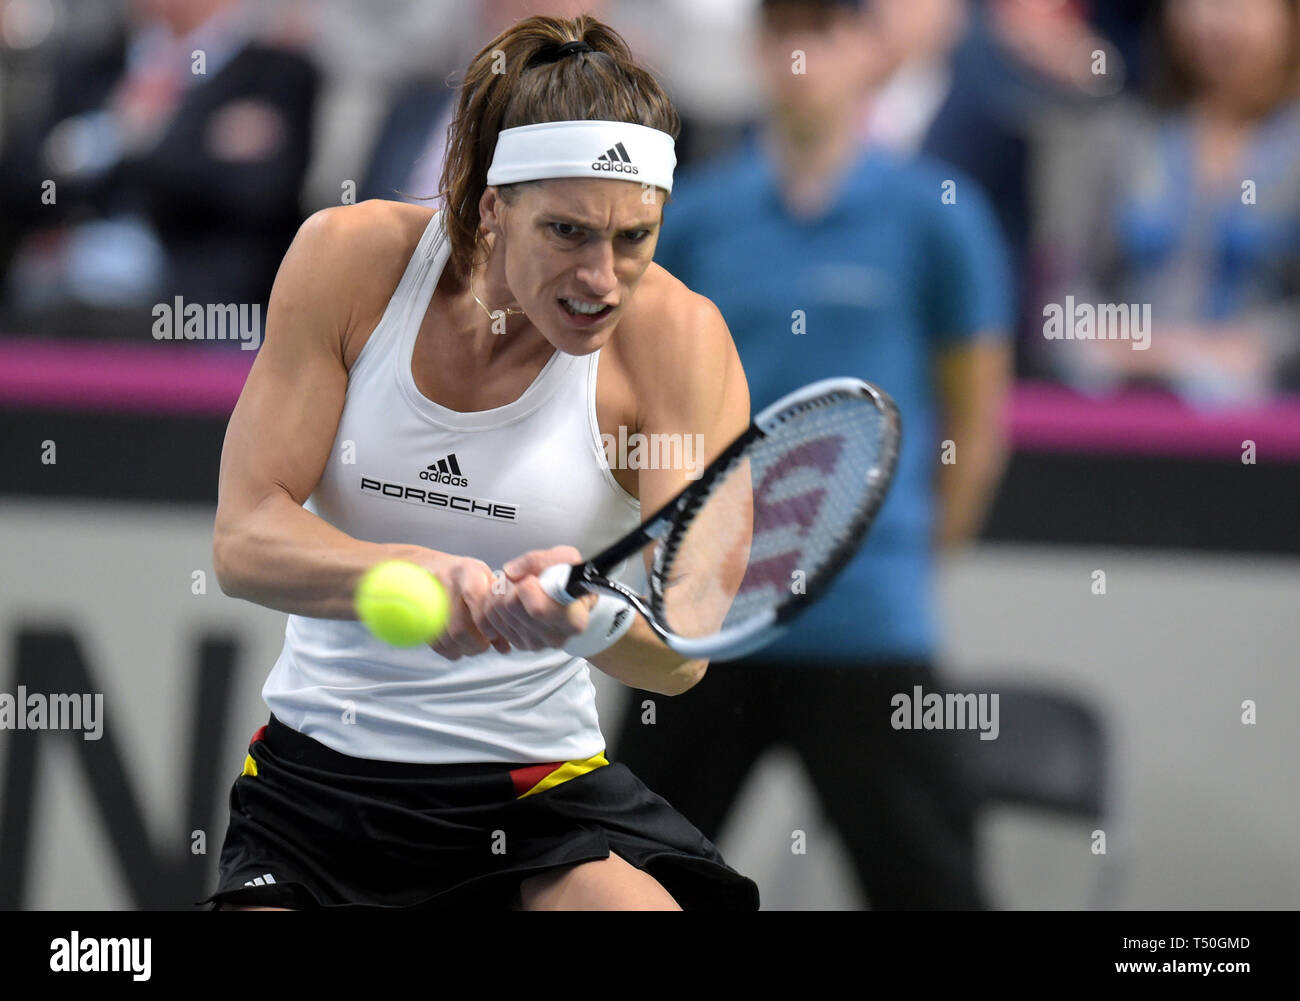 Riga. 19th Apr, 2019. Andrea Petkovic of Germany returns a shot to Jelena Ostapenko of Latvia during the 2019 Fed Cup World Group Play-offs between Latvia and Germany in Riga, Latvia on April 19, 2019. Credit: Edijs Palens/Xinhua/Alamy Live News Stock Photo